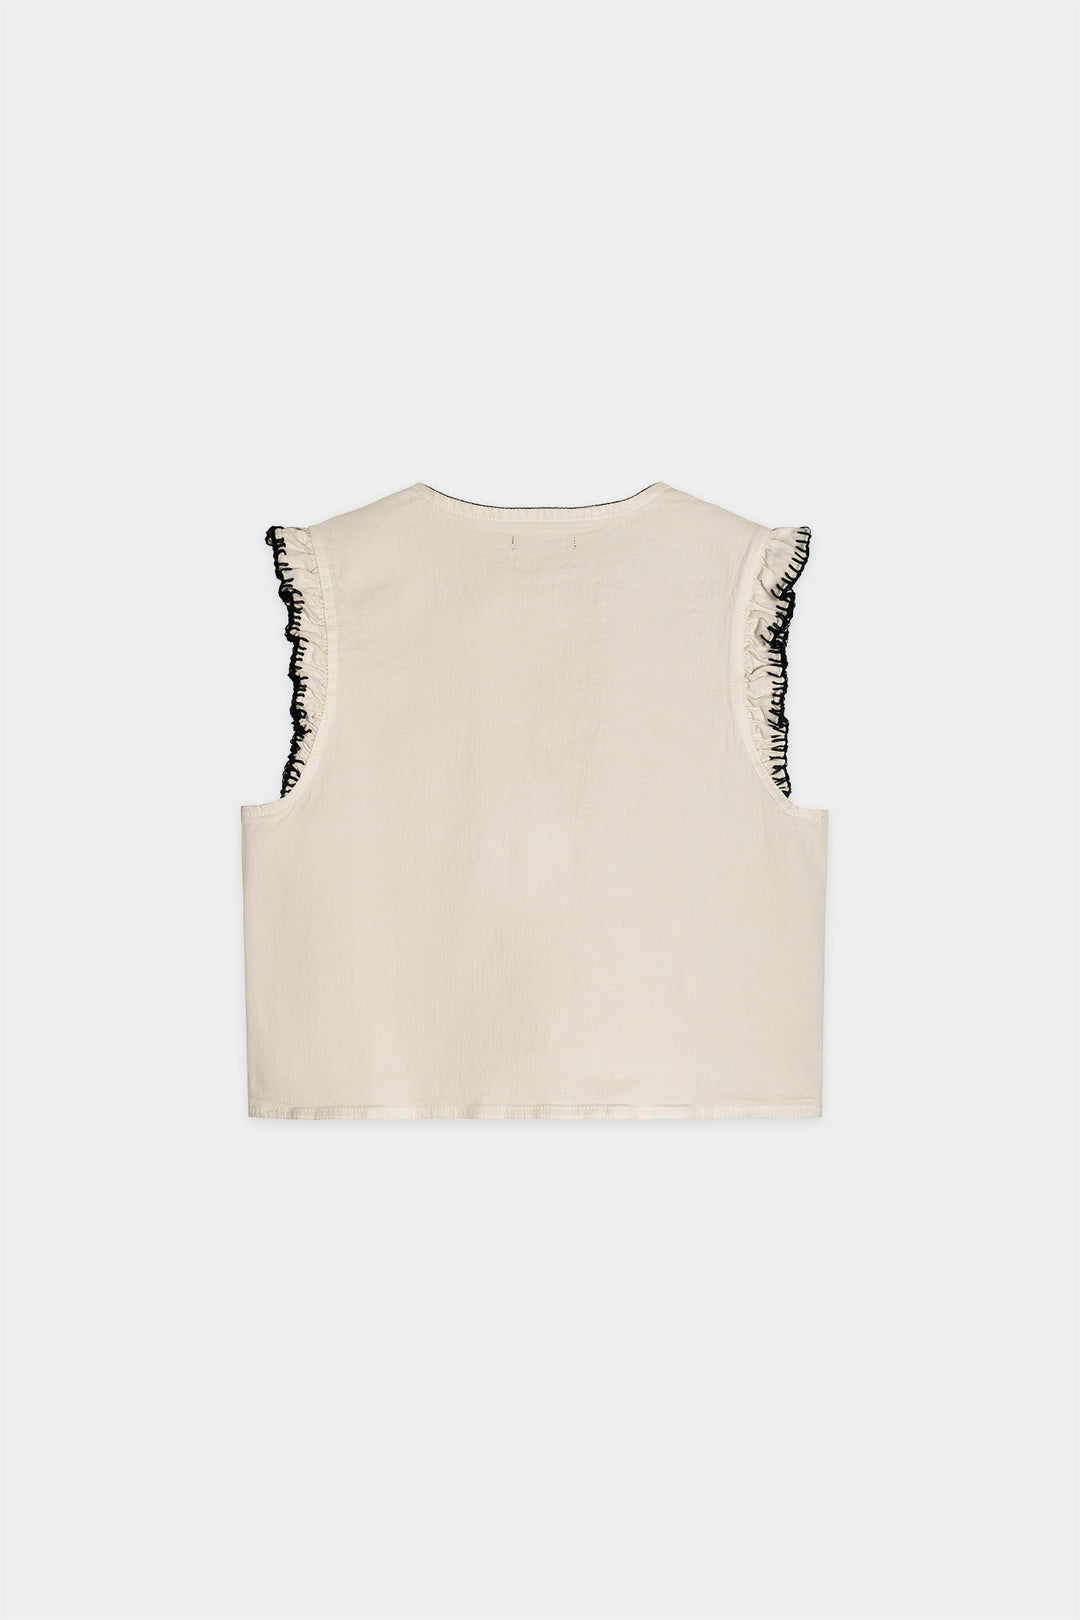 CONTRAST EMBROIDERY VEST